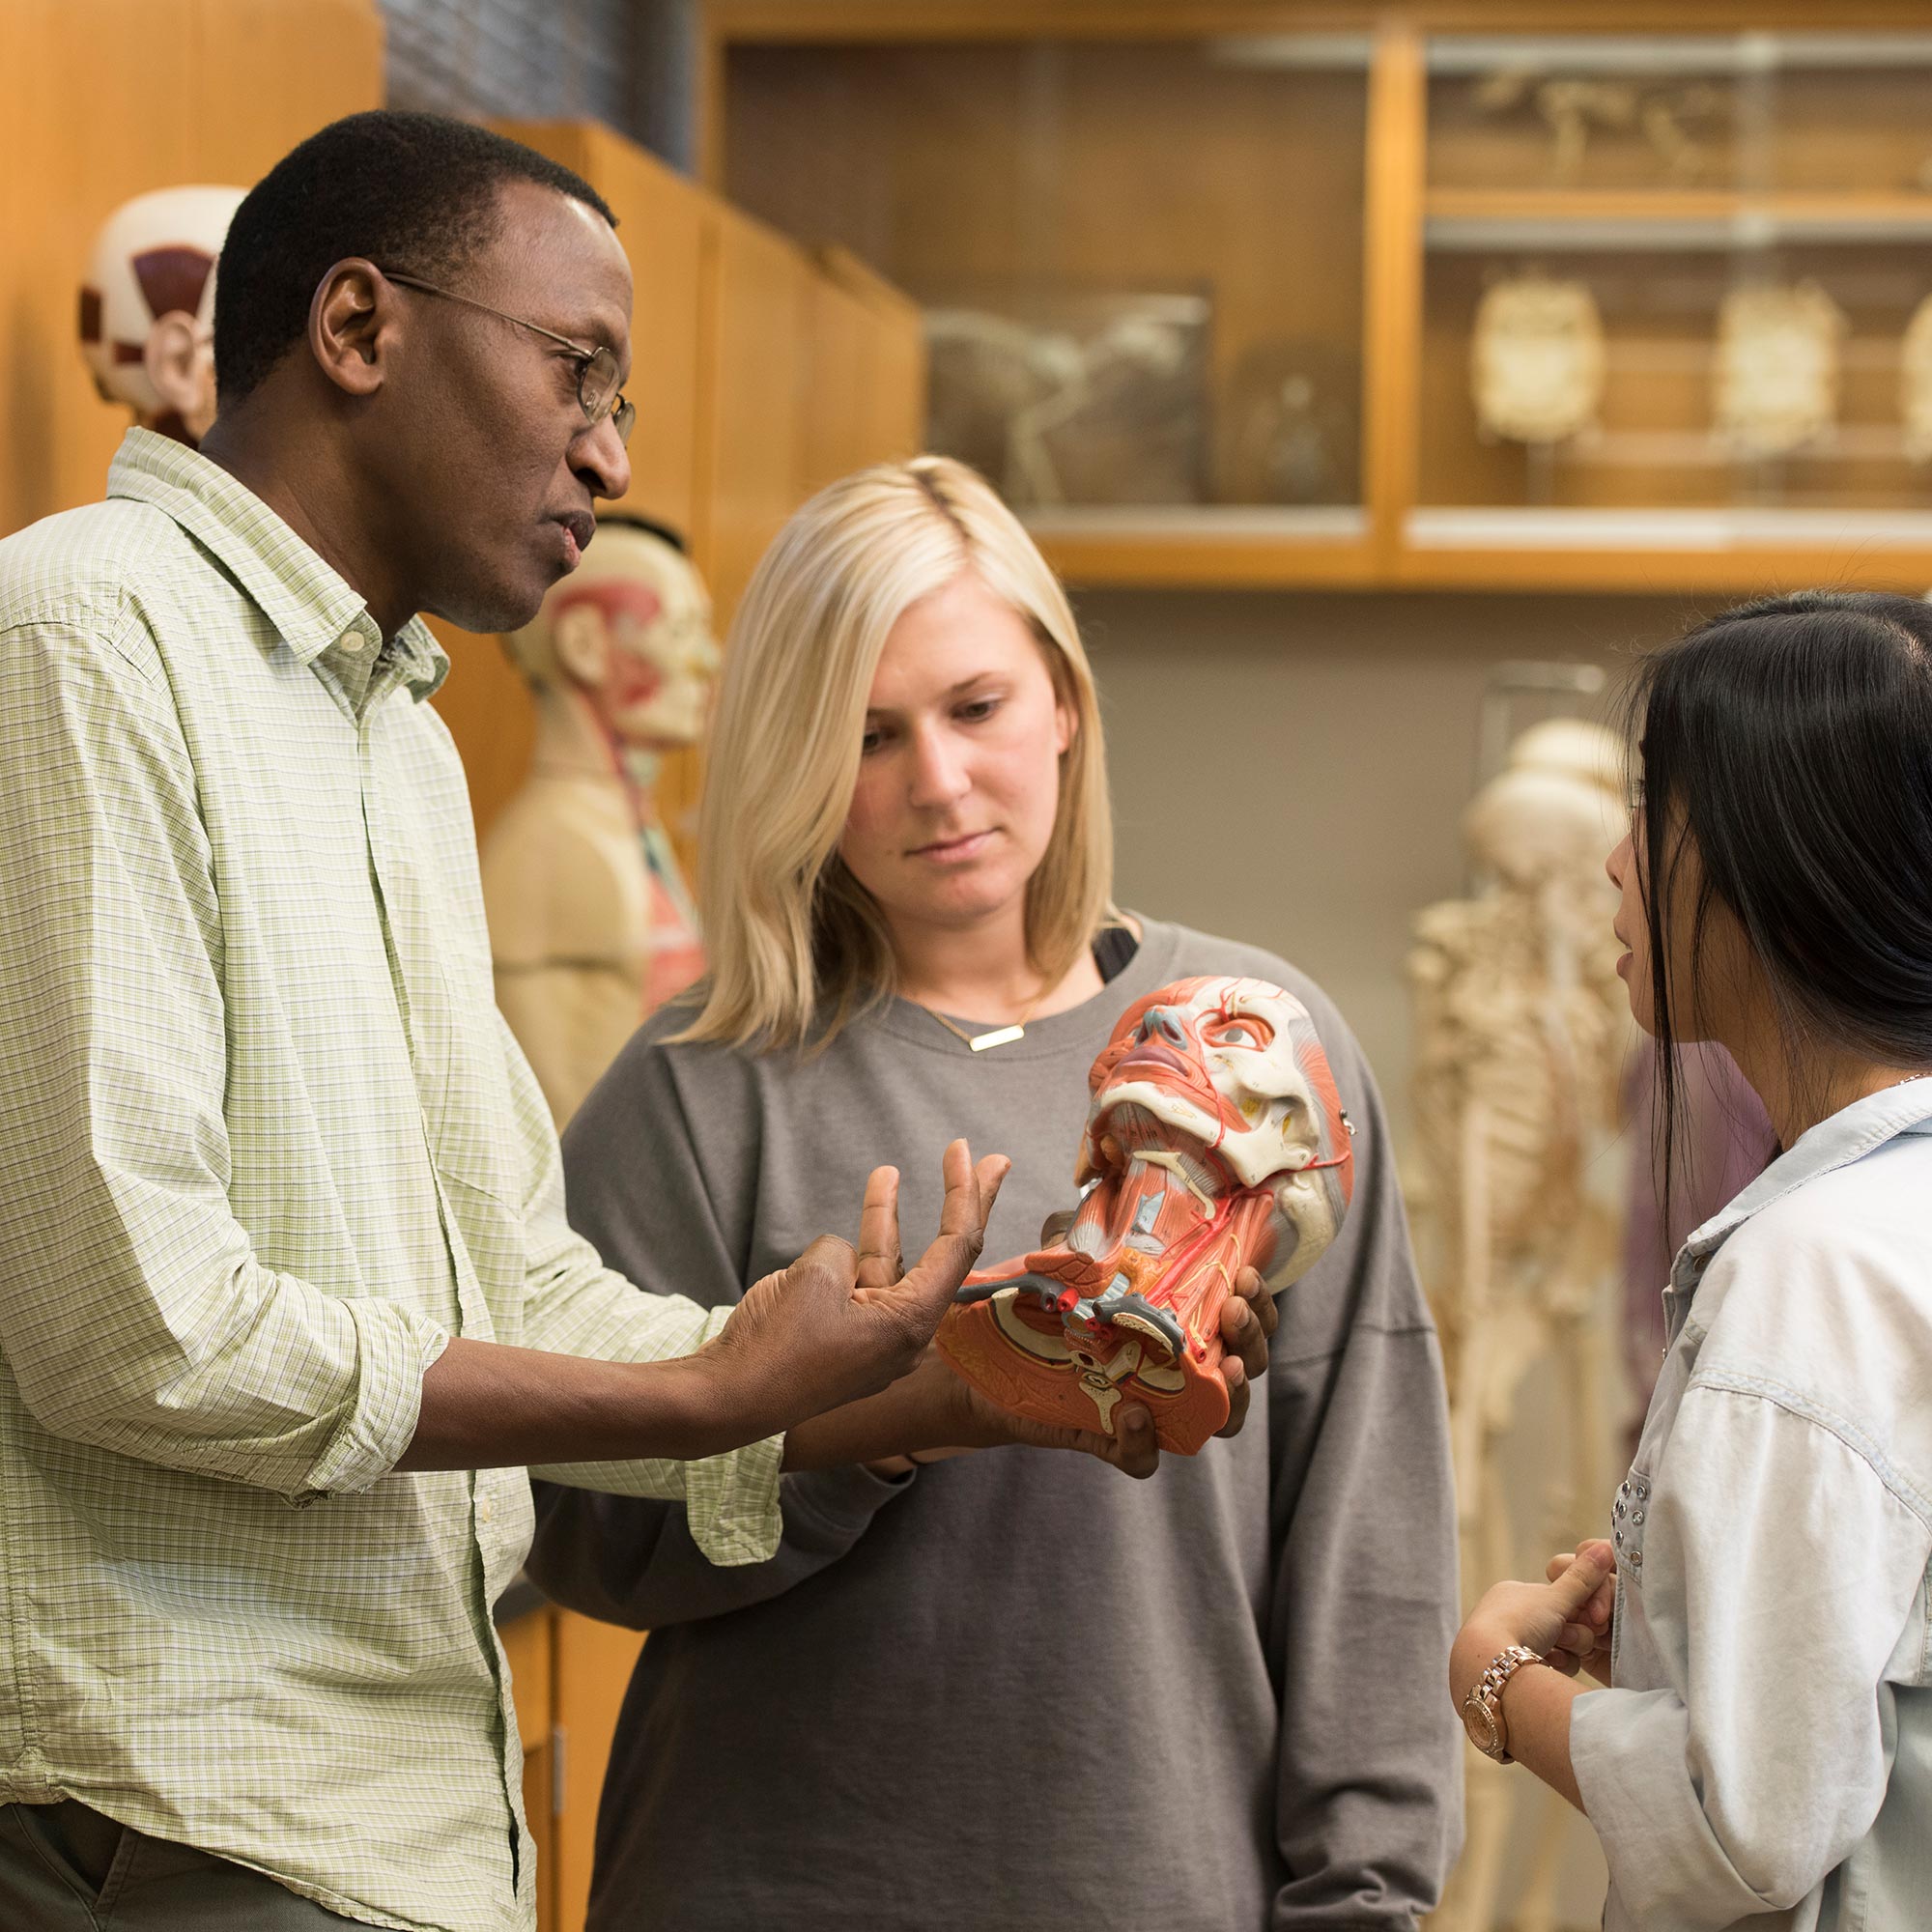 Students in anatomy class look at a model of a skull with their professor